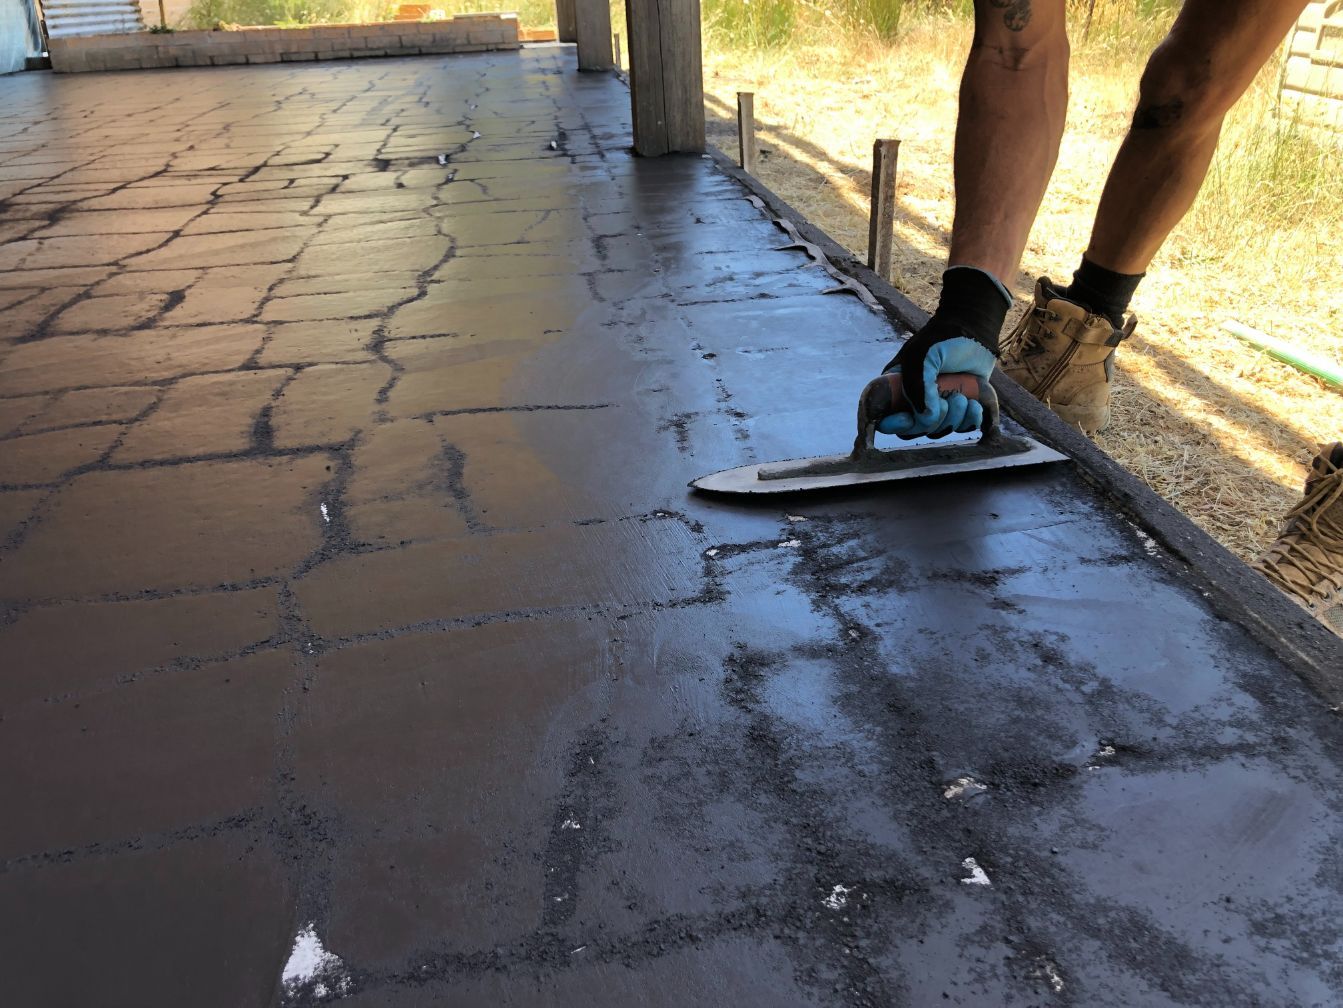 Concreters Bacchus Marsh finishing stenciled concrete at a job in Pentland Hills